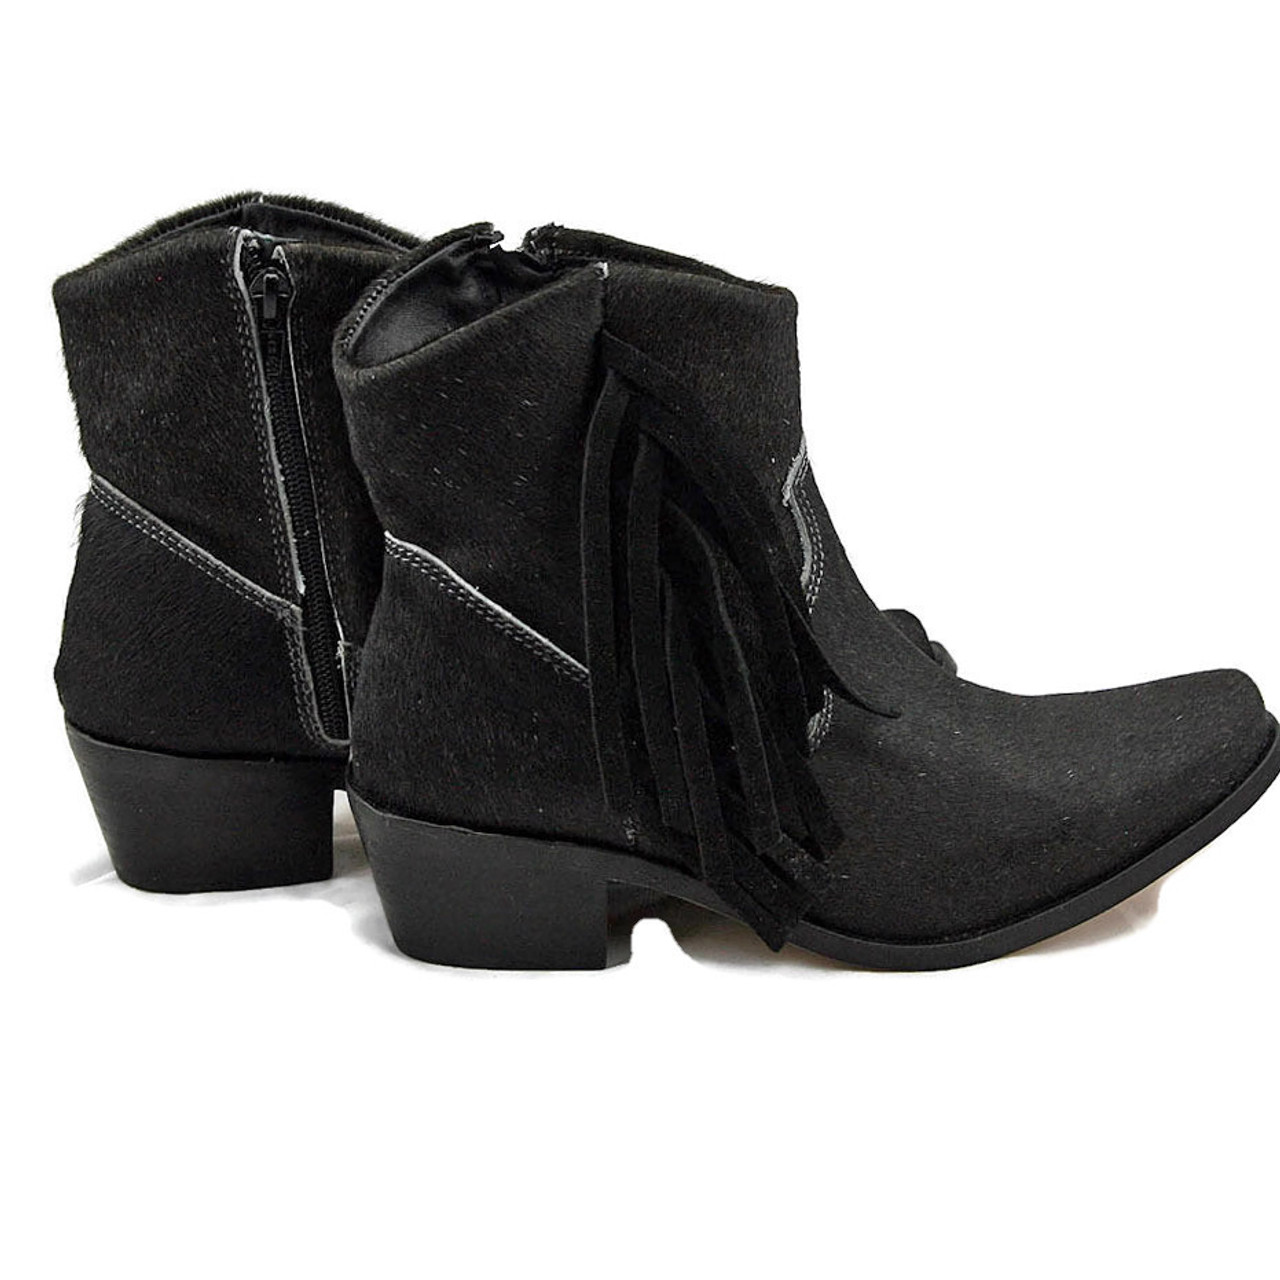 Ankle Boots - Black Cowhide with Fringe - AgaveSky